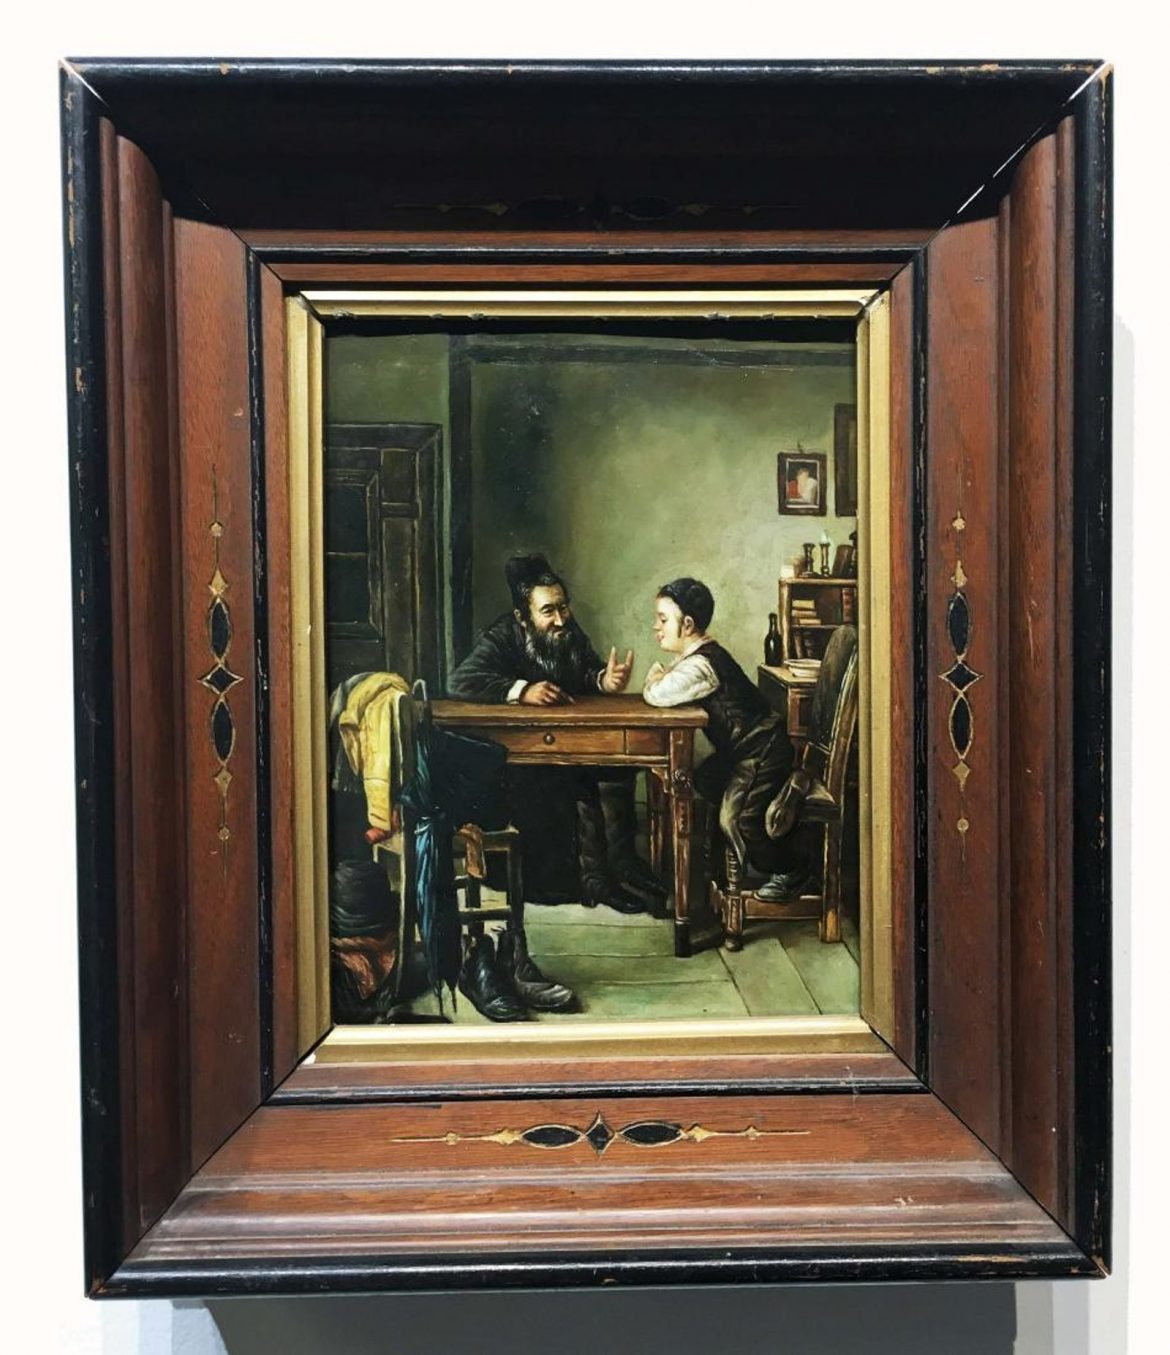 Painting: Yeshiva Boy After Openheimer - at Manhattan Art & Antiques Center's June 2018 Auction